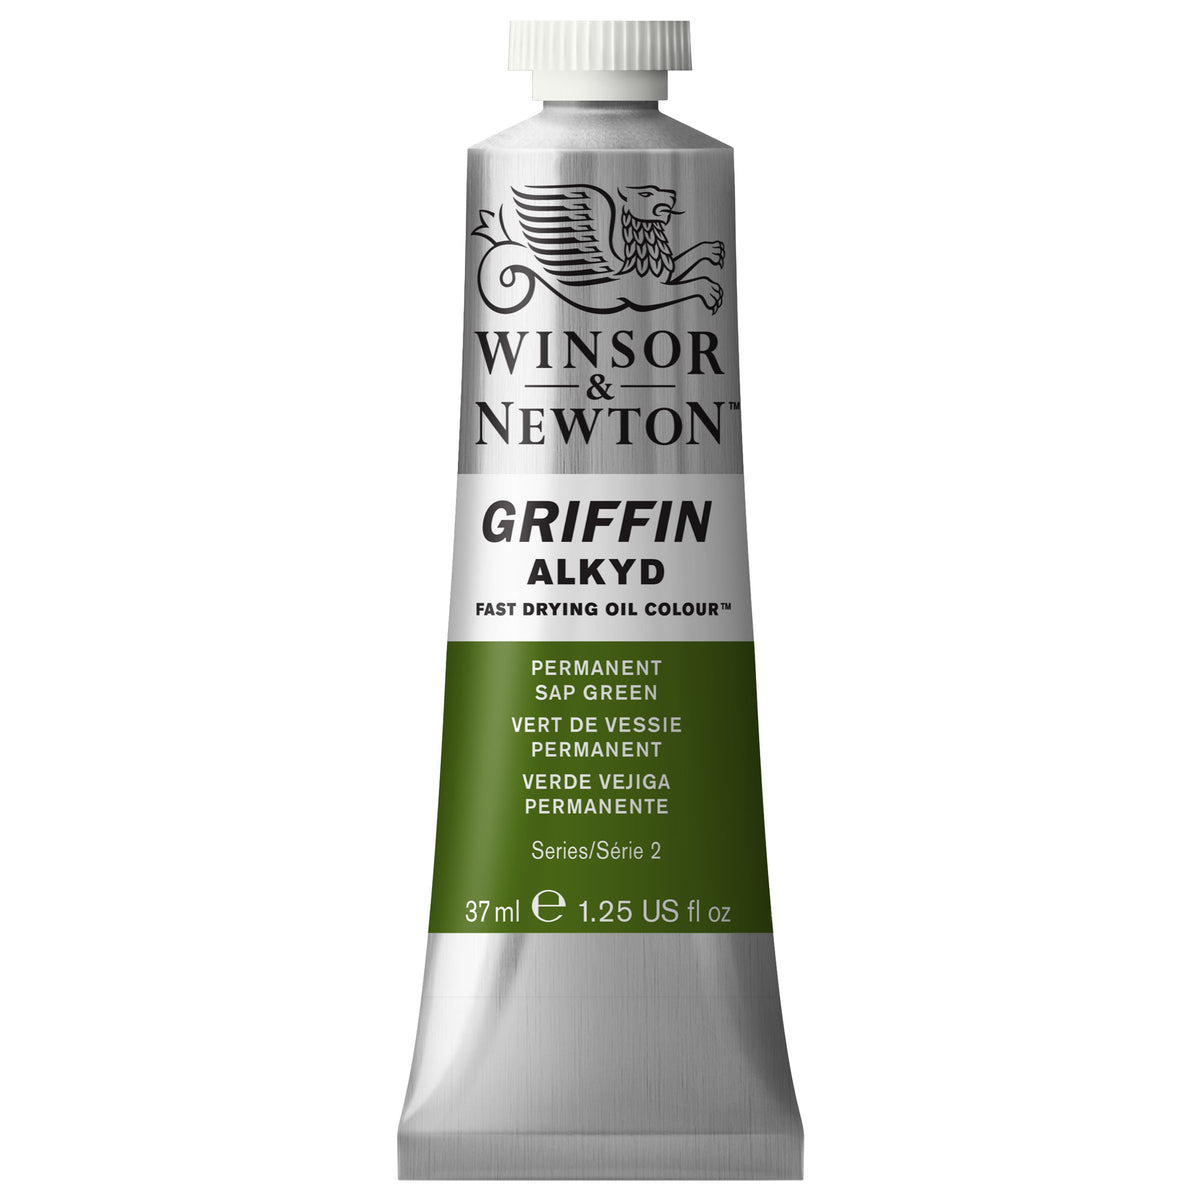 Winsor &amp; Newton Griffin Alkyd Fast Drying Oil Colour 37ml - Series 2